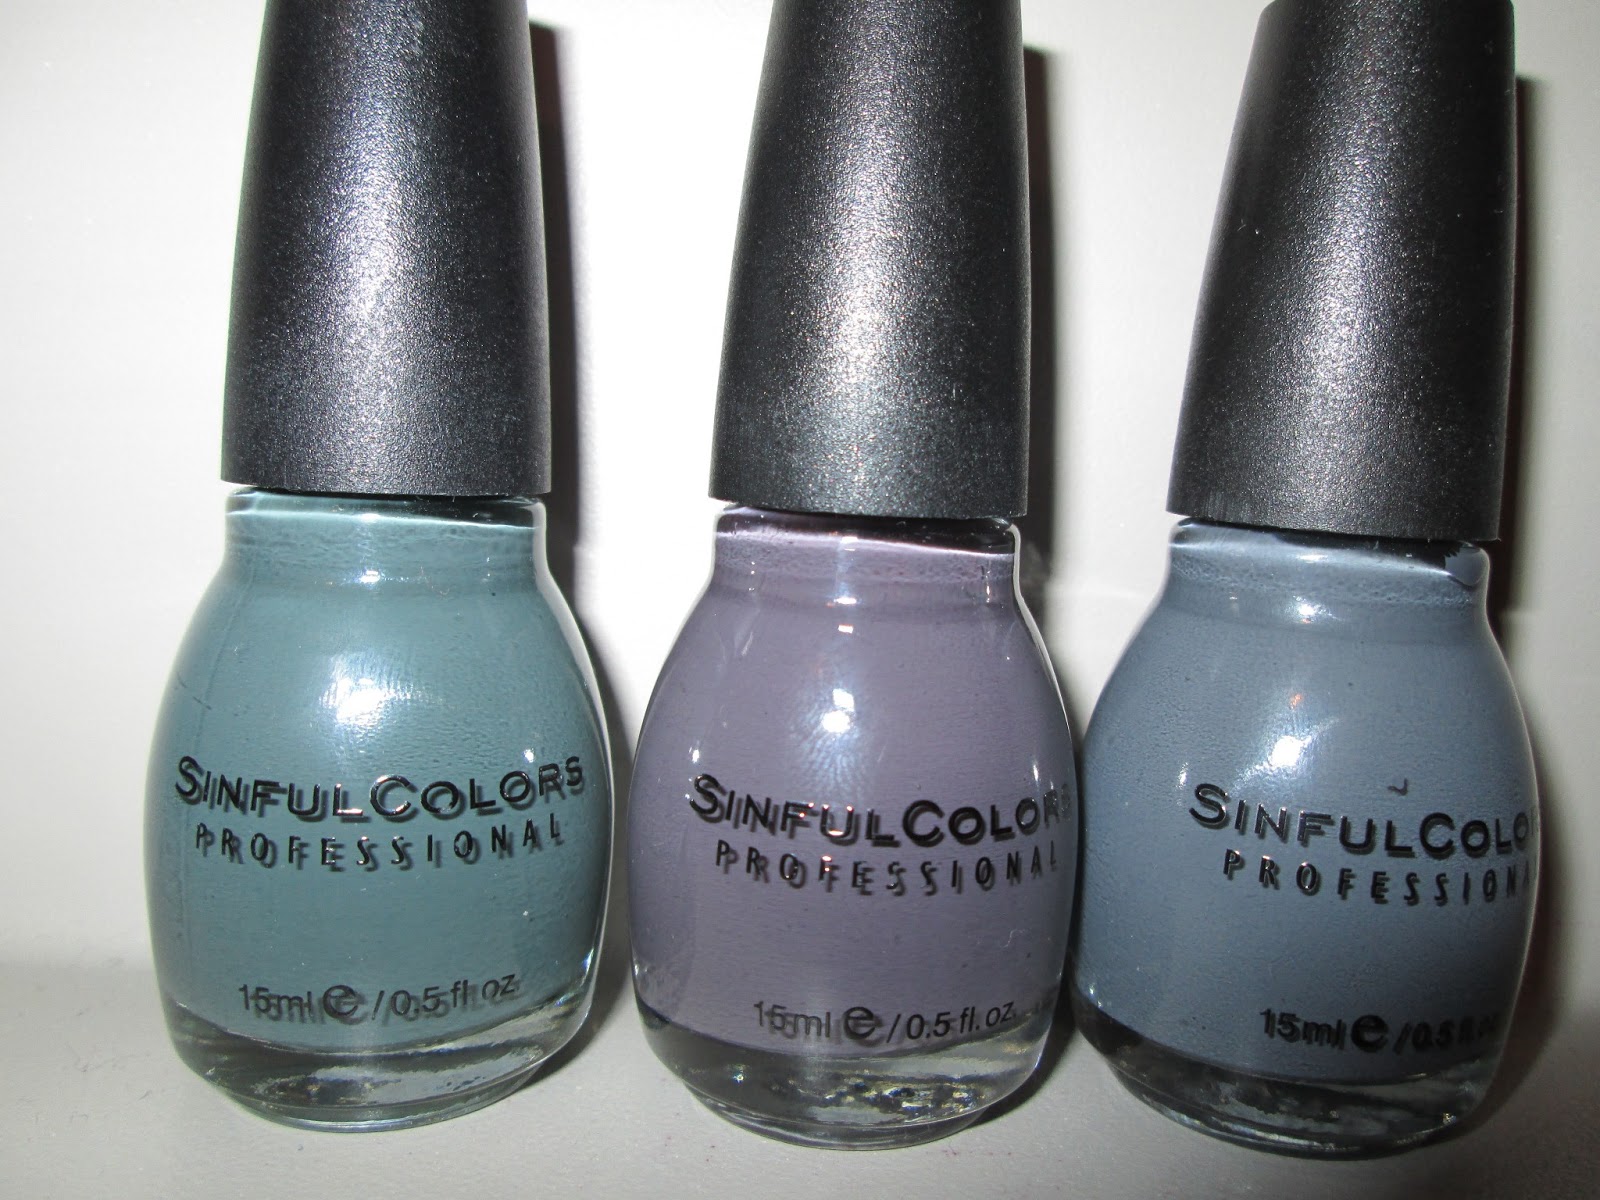 10. Sinful Colors Nail Polish Shades - Explore the full range of colors - wide 10